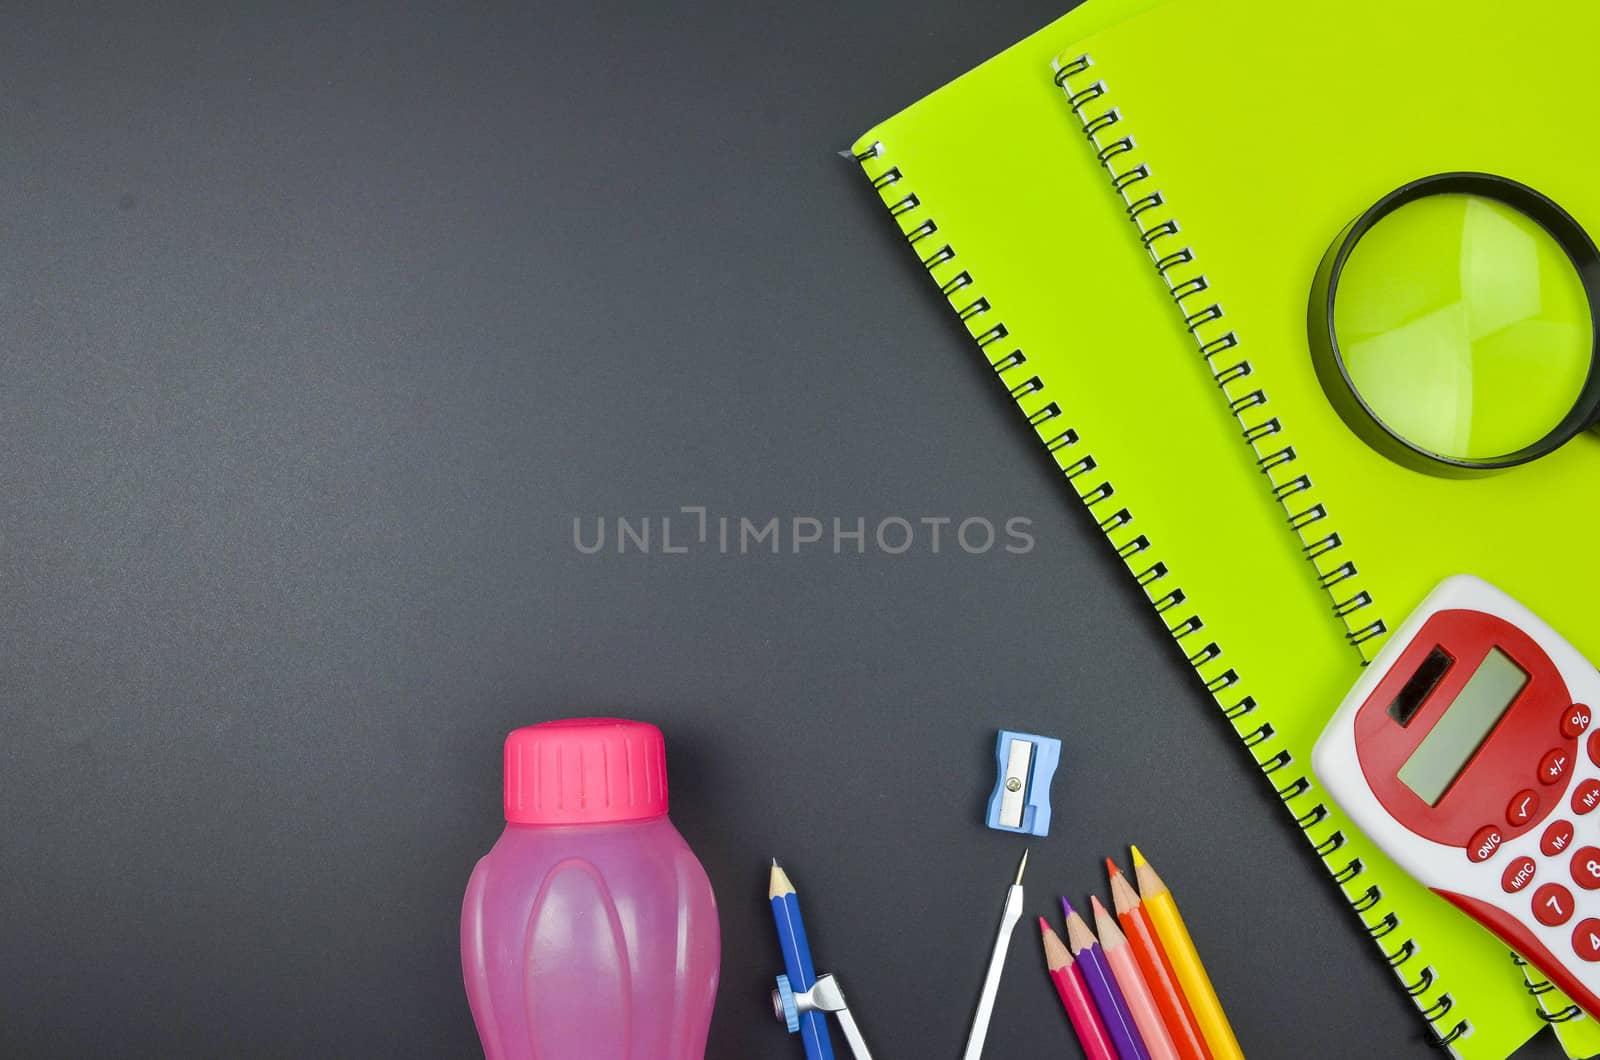 Various school supplies. studying, education and back to school concept. Black background and selective focus.